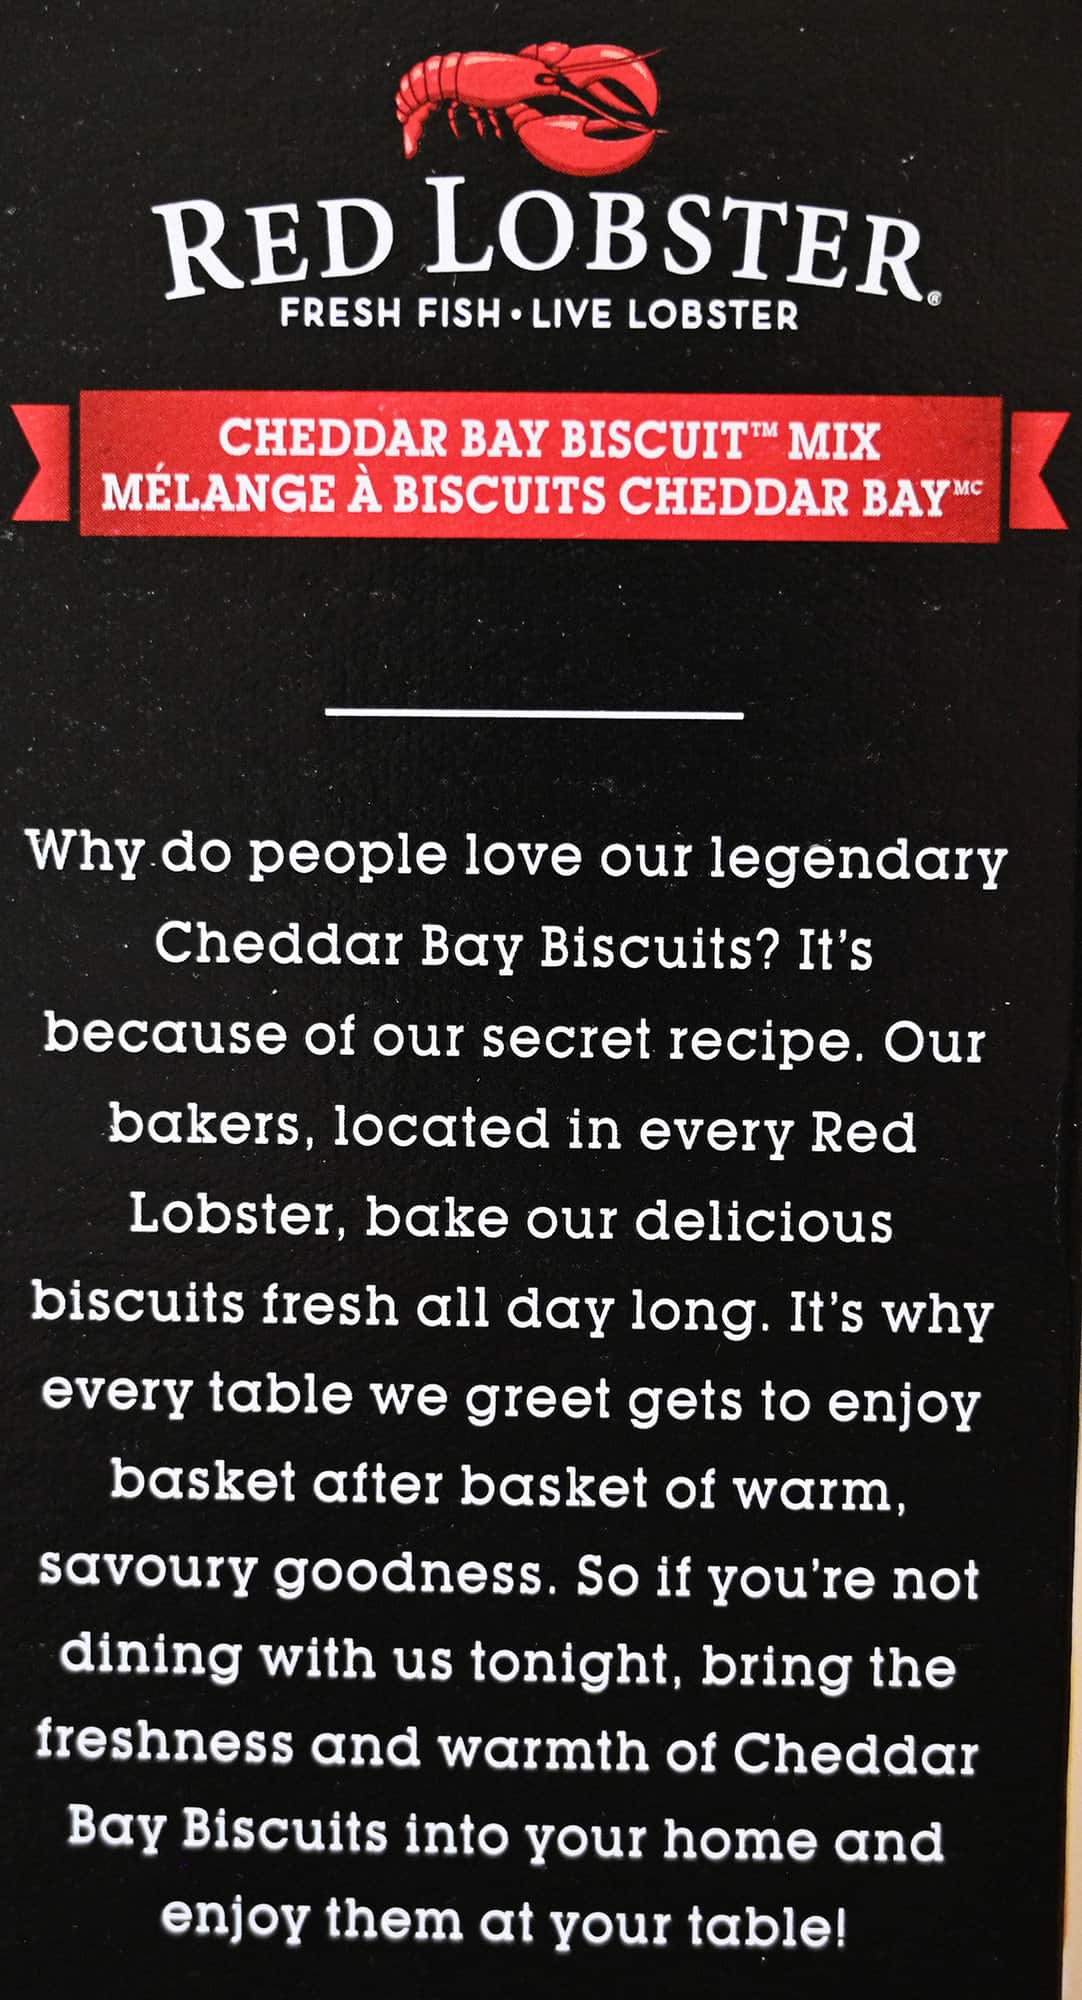 Image of the biscuit mix product description from the back of the box.